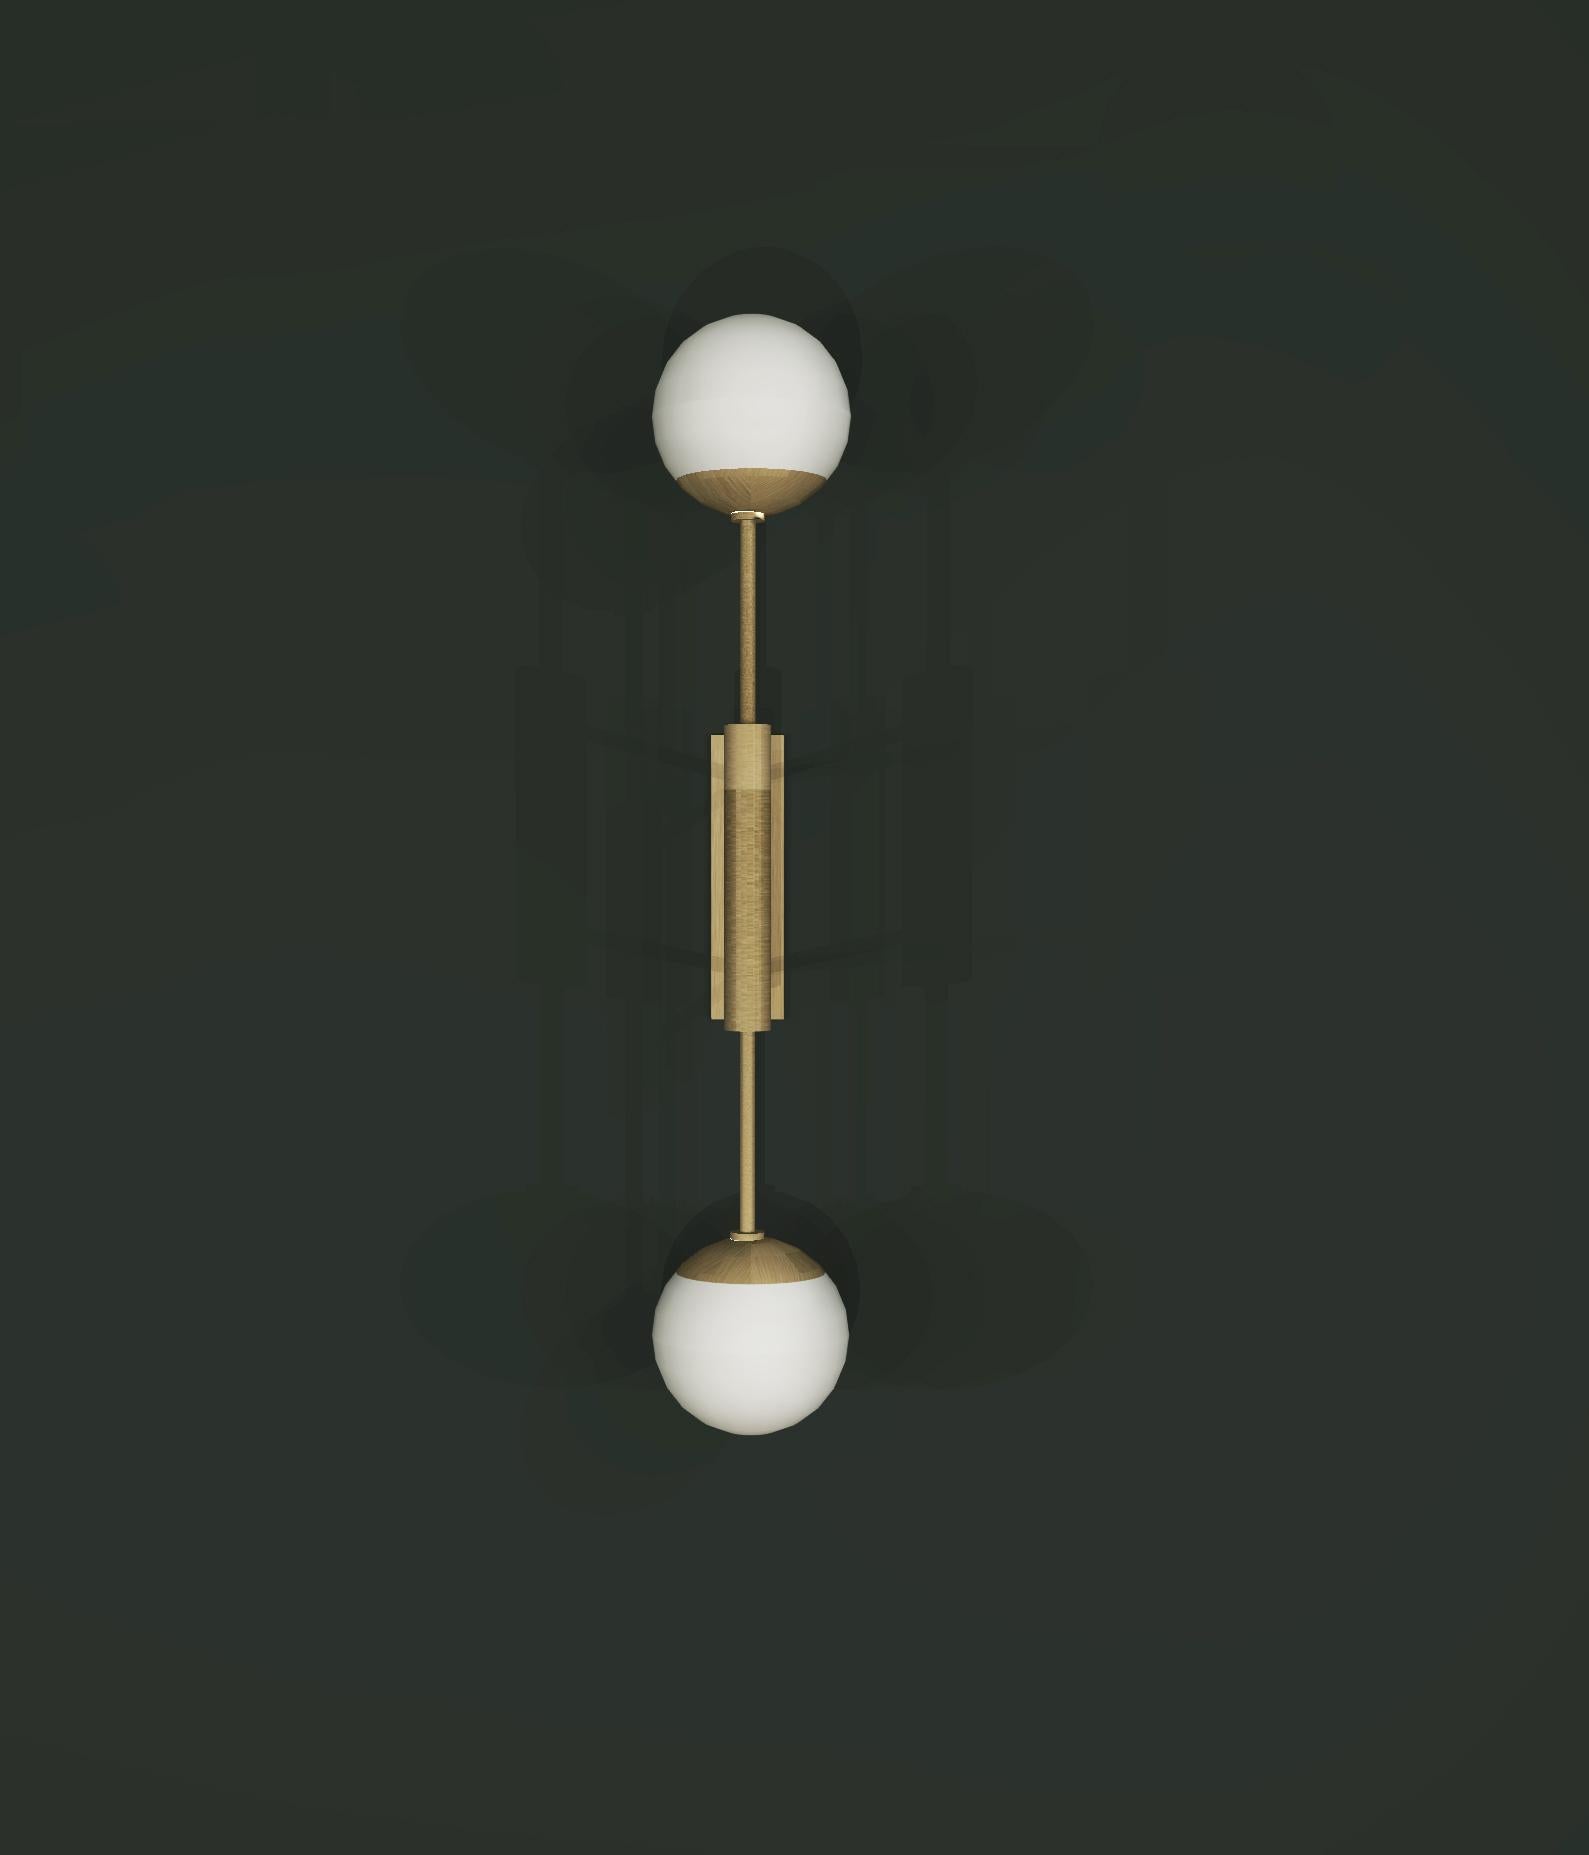 Design and crafted by world-renowned lighting brand Imagin, and inspired by architectural details and midcentury design, this wall light is simple and bold. Using geometric language and limited materials, consistent, yet sophisticated compositional